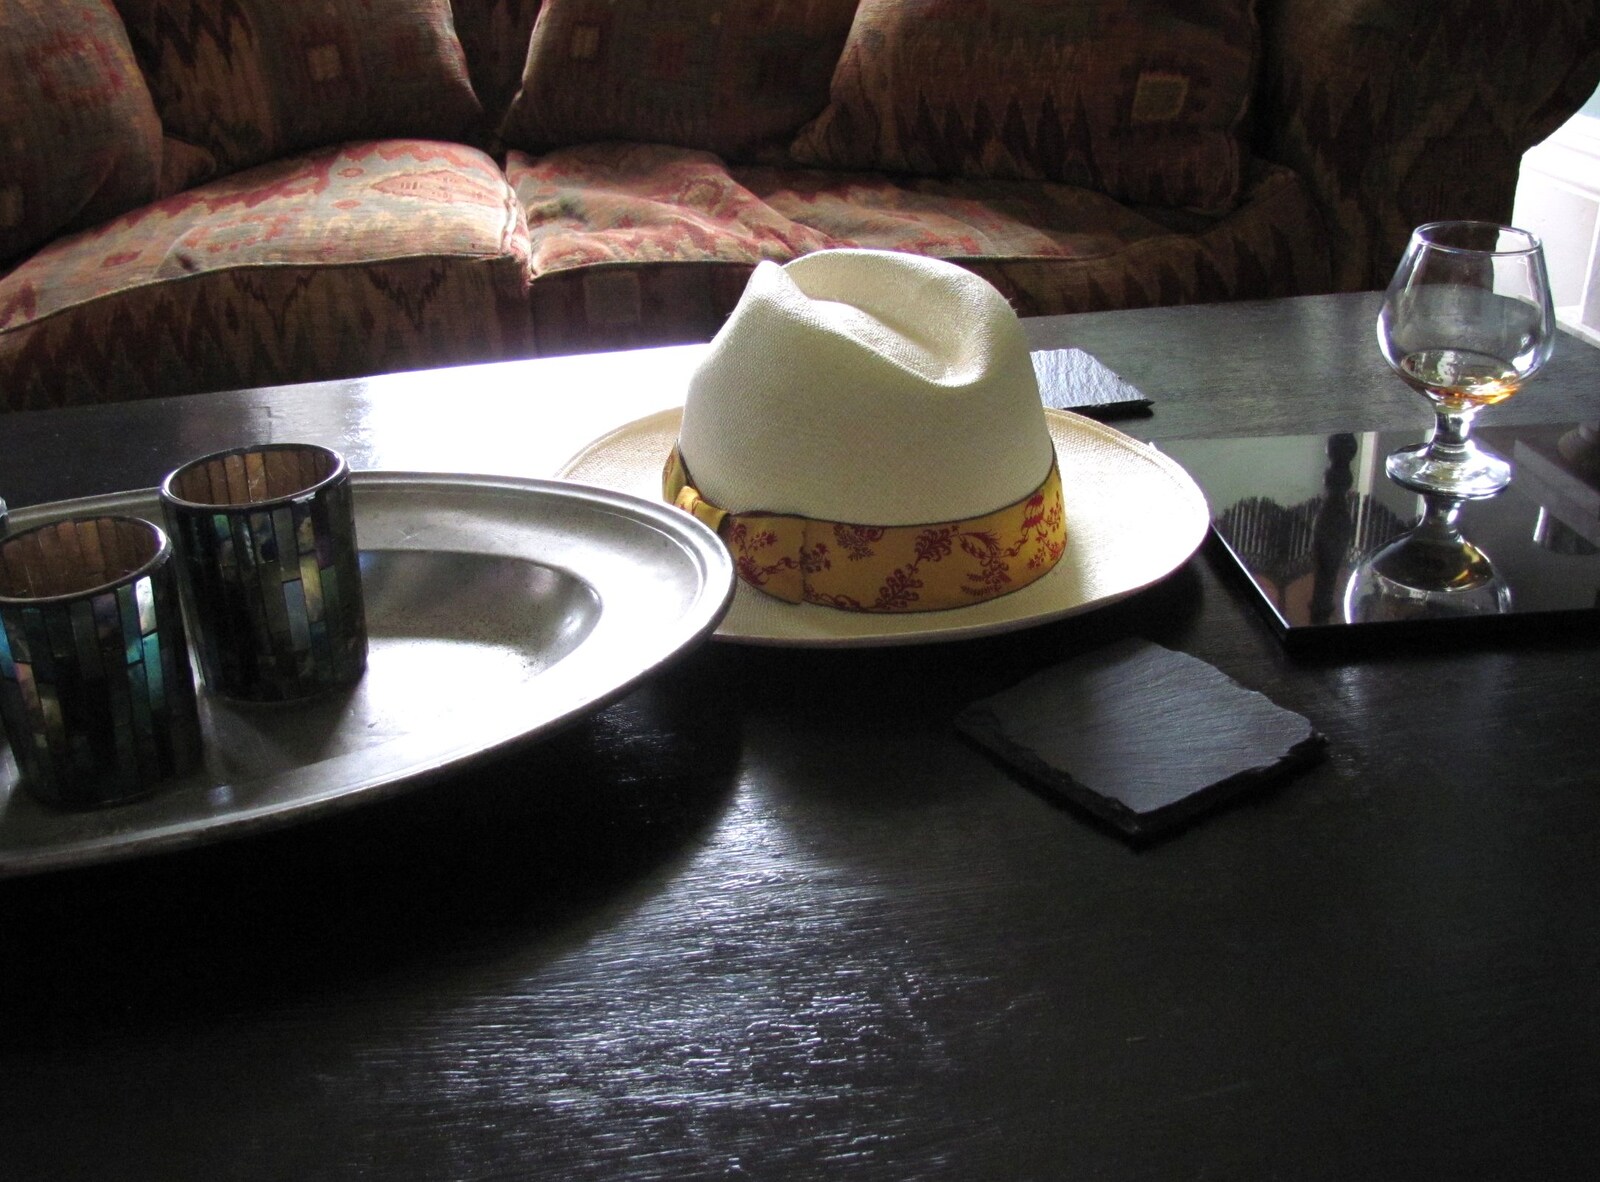 Mike's hat from Mike's Memorial, Prince Hall Hotel, Two Bridges, Dartmoor - 12th July 2011